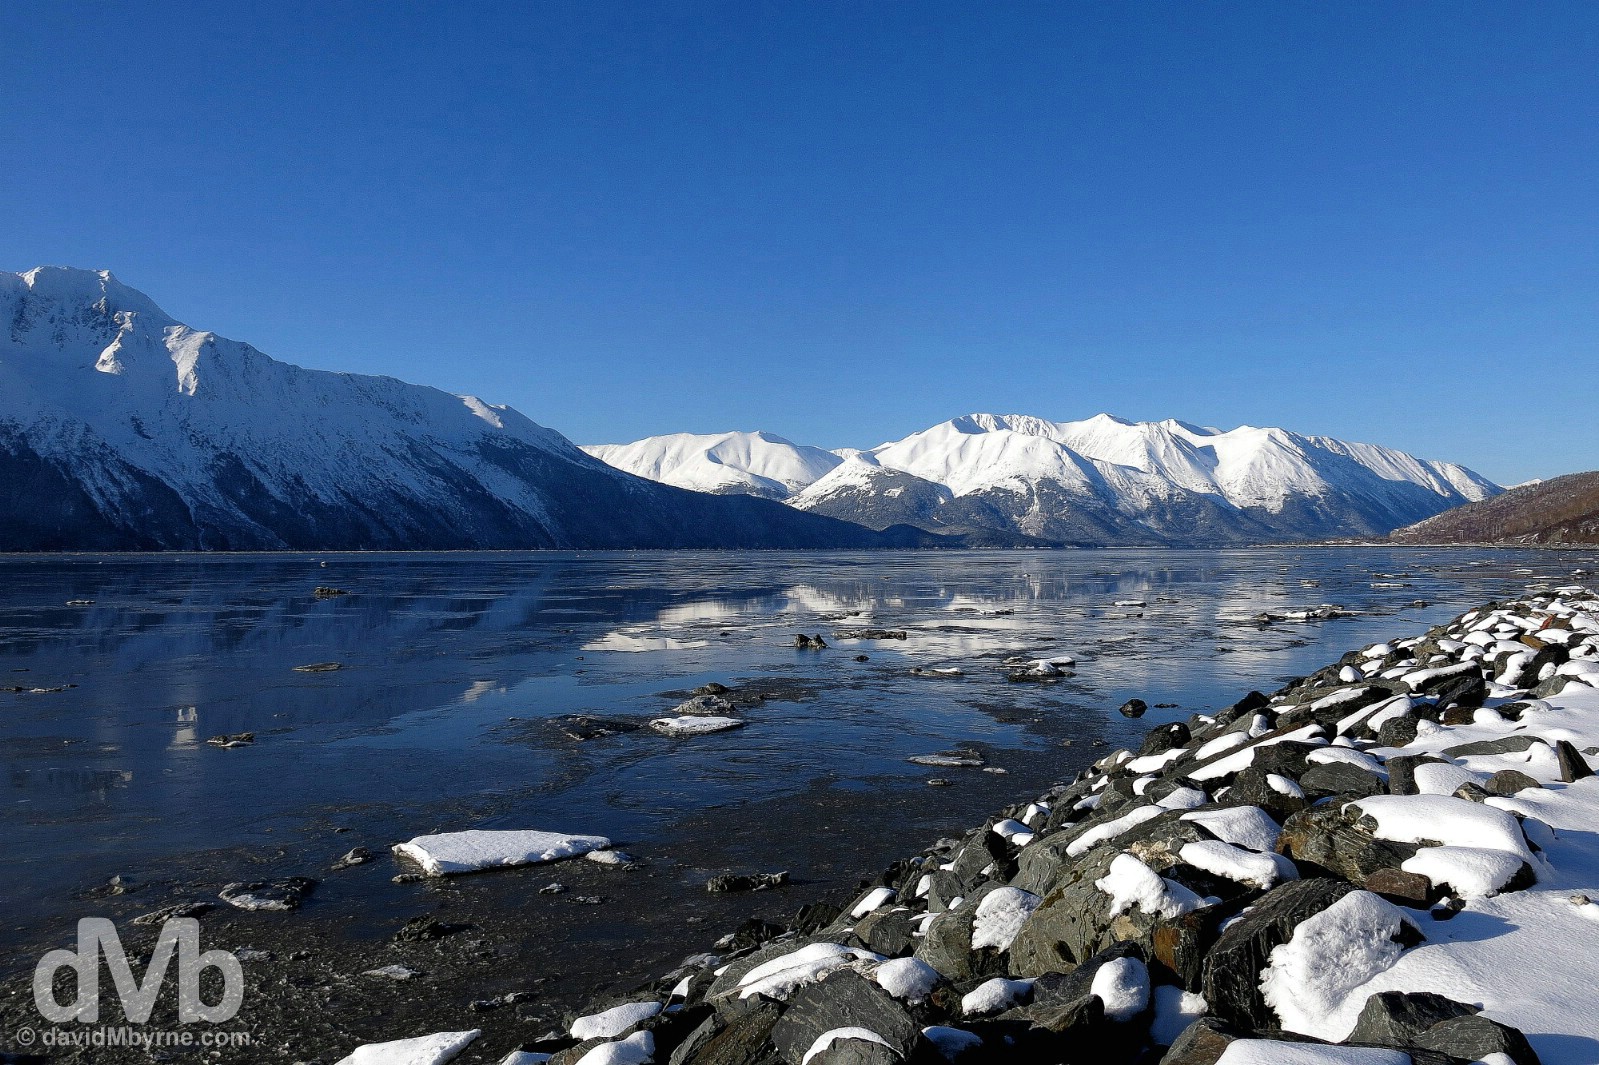 Early morning at Turnagain Arm of Cook Inlet off the Seward Highway, Alaska, USA. March 12, 2013.